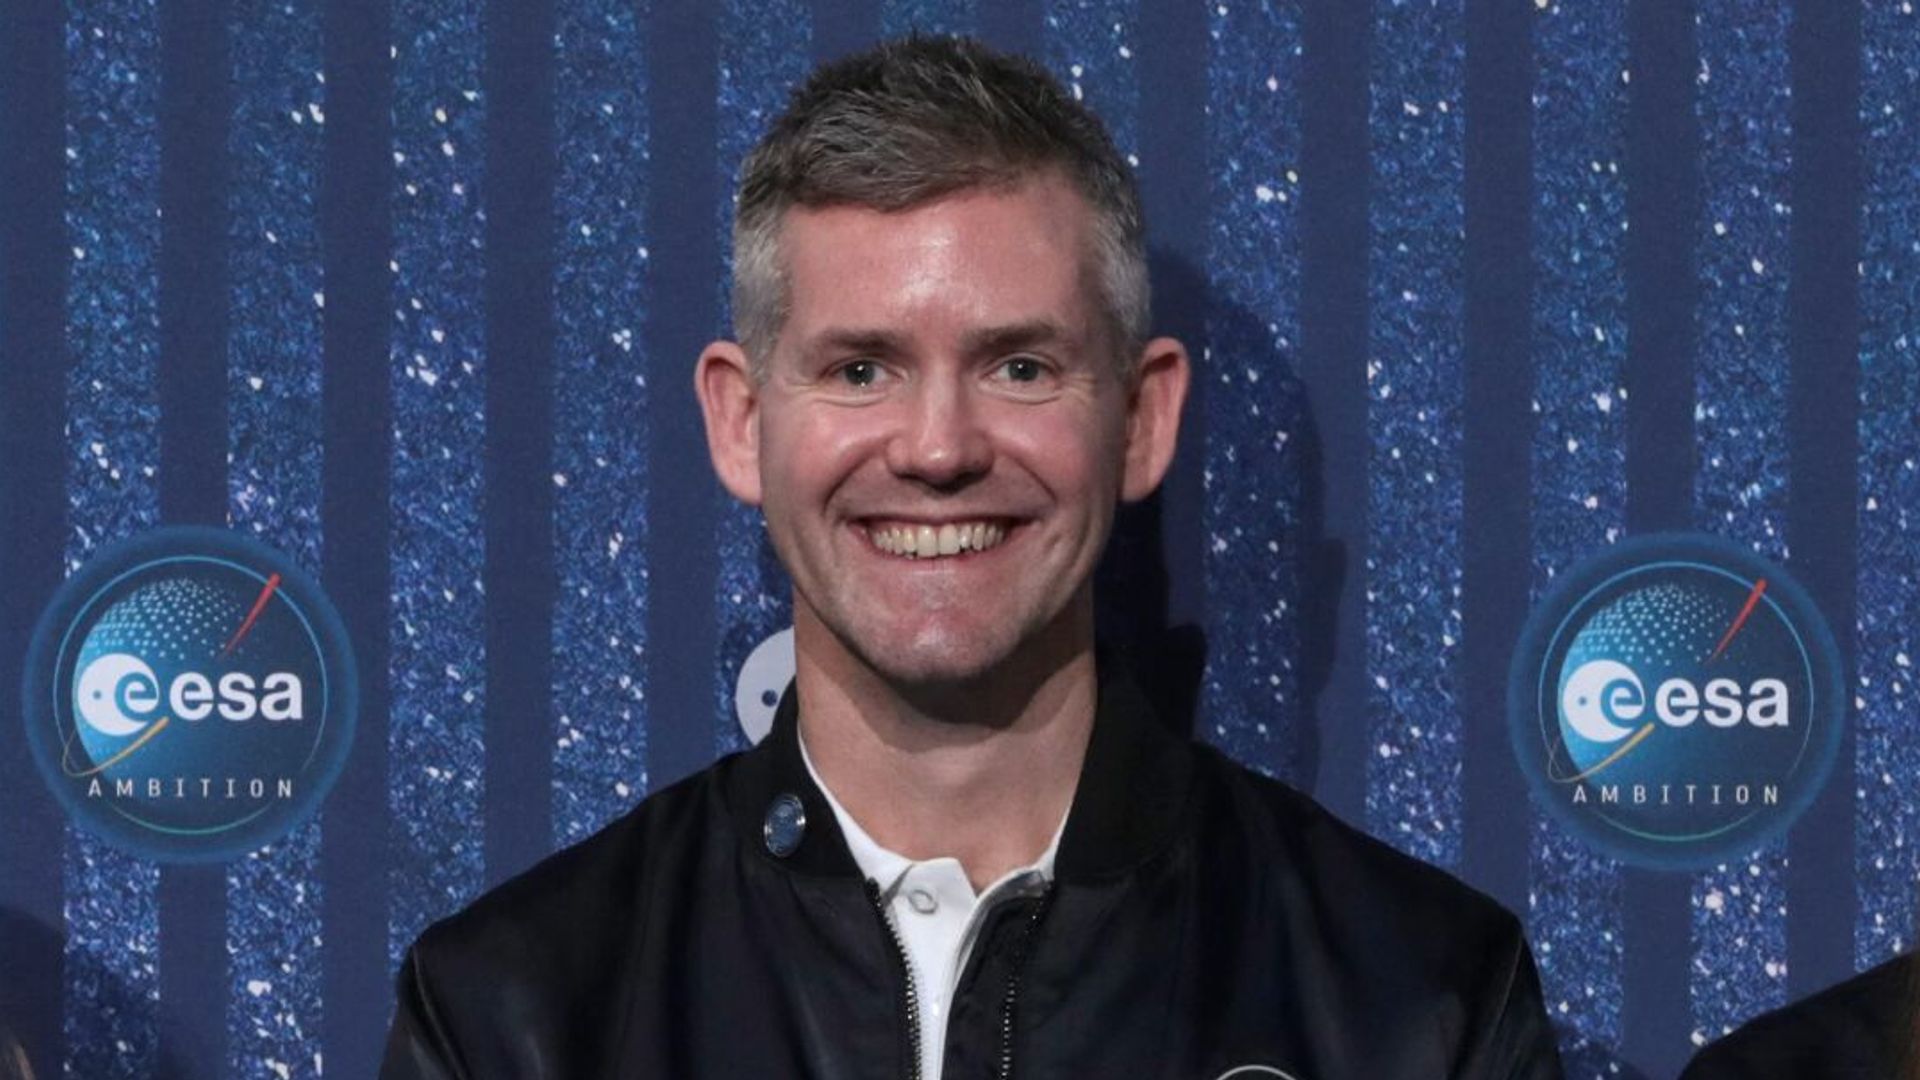 Paralympic bronze medalist McFall becomes first disabled astronaut